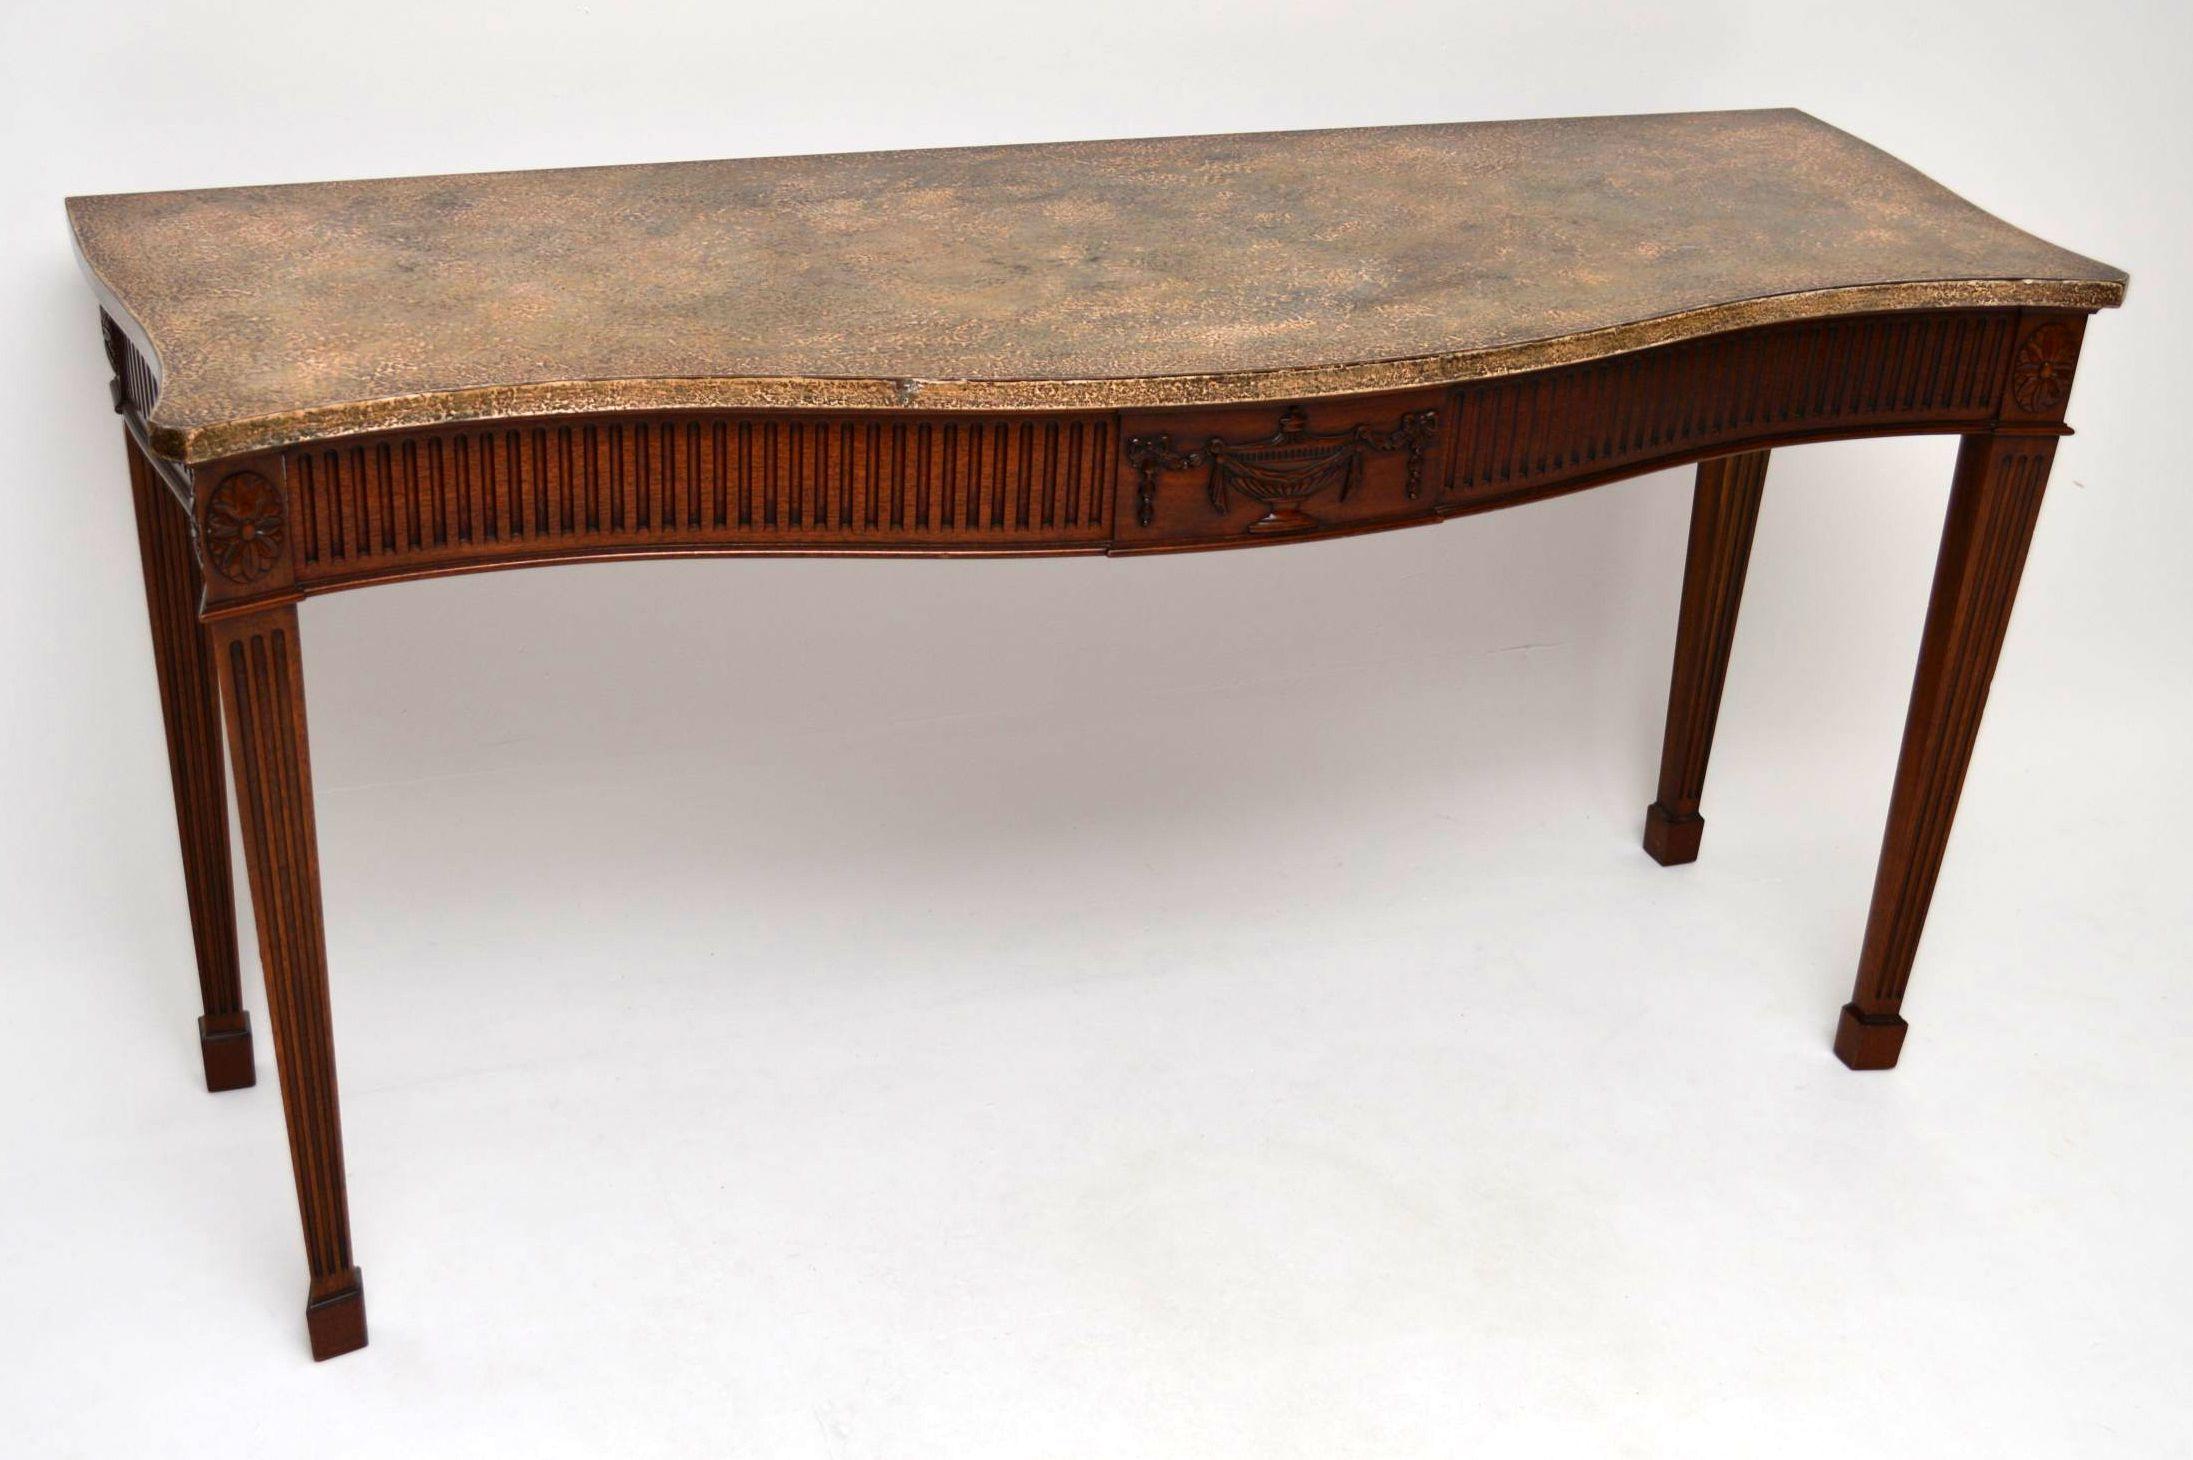 Very long solid mahogany console side table in mahogany, with a very unusual top which looks like stone, but isn't. The top must have been made with the rest of the table & it is fixed on. It was made to look like marble or some kind of stone &